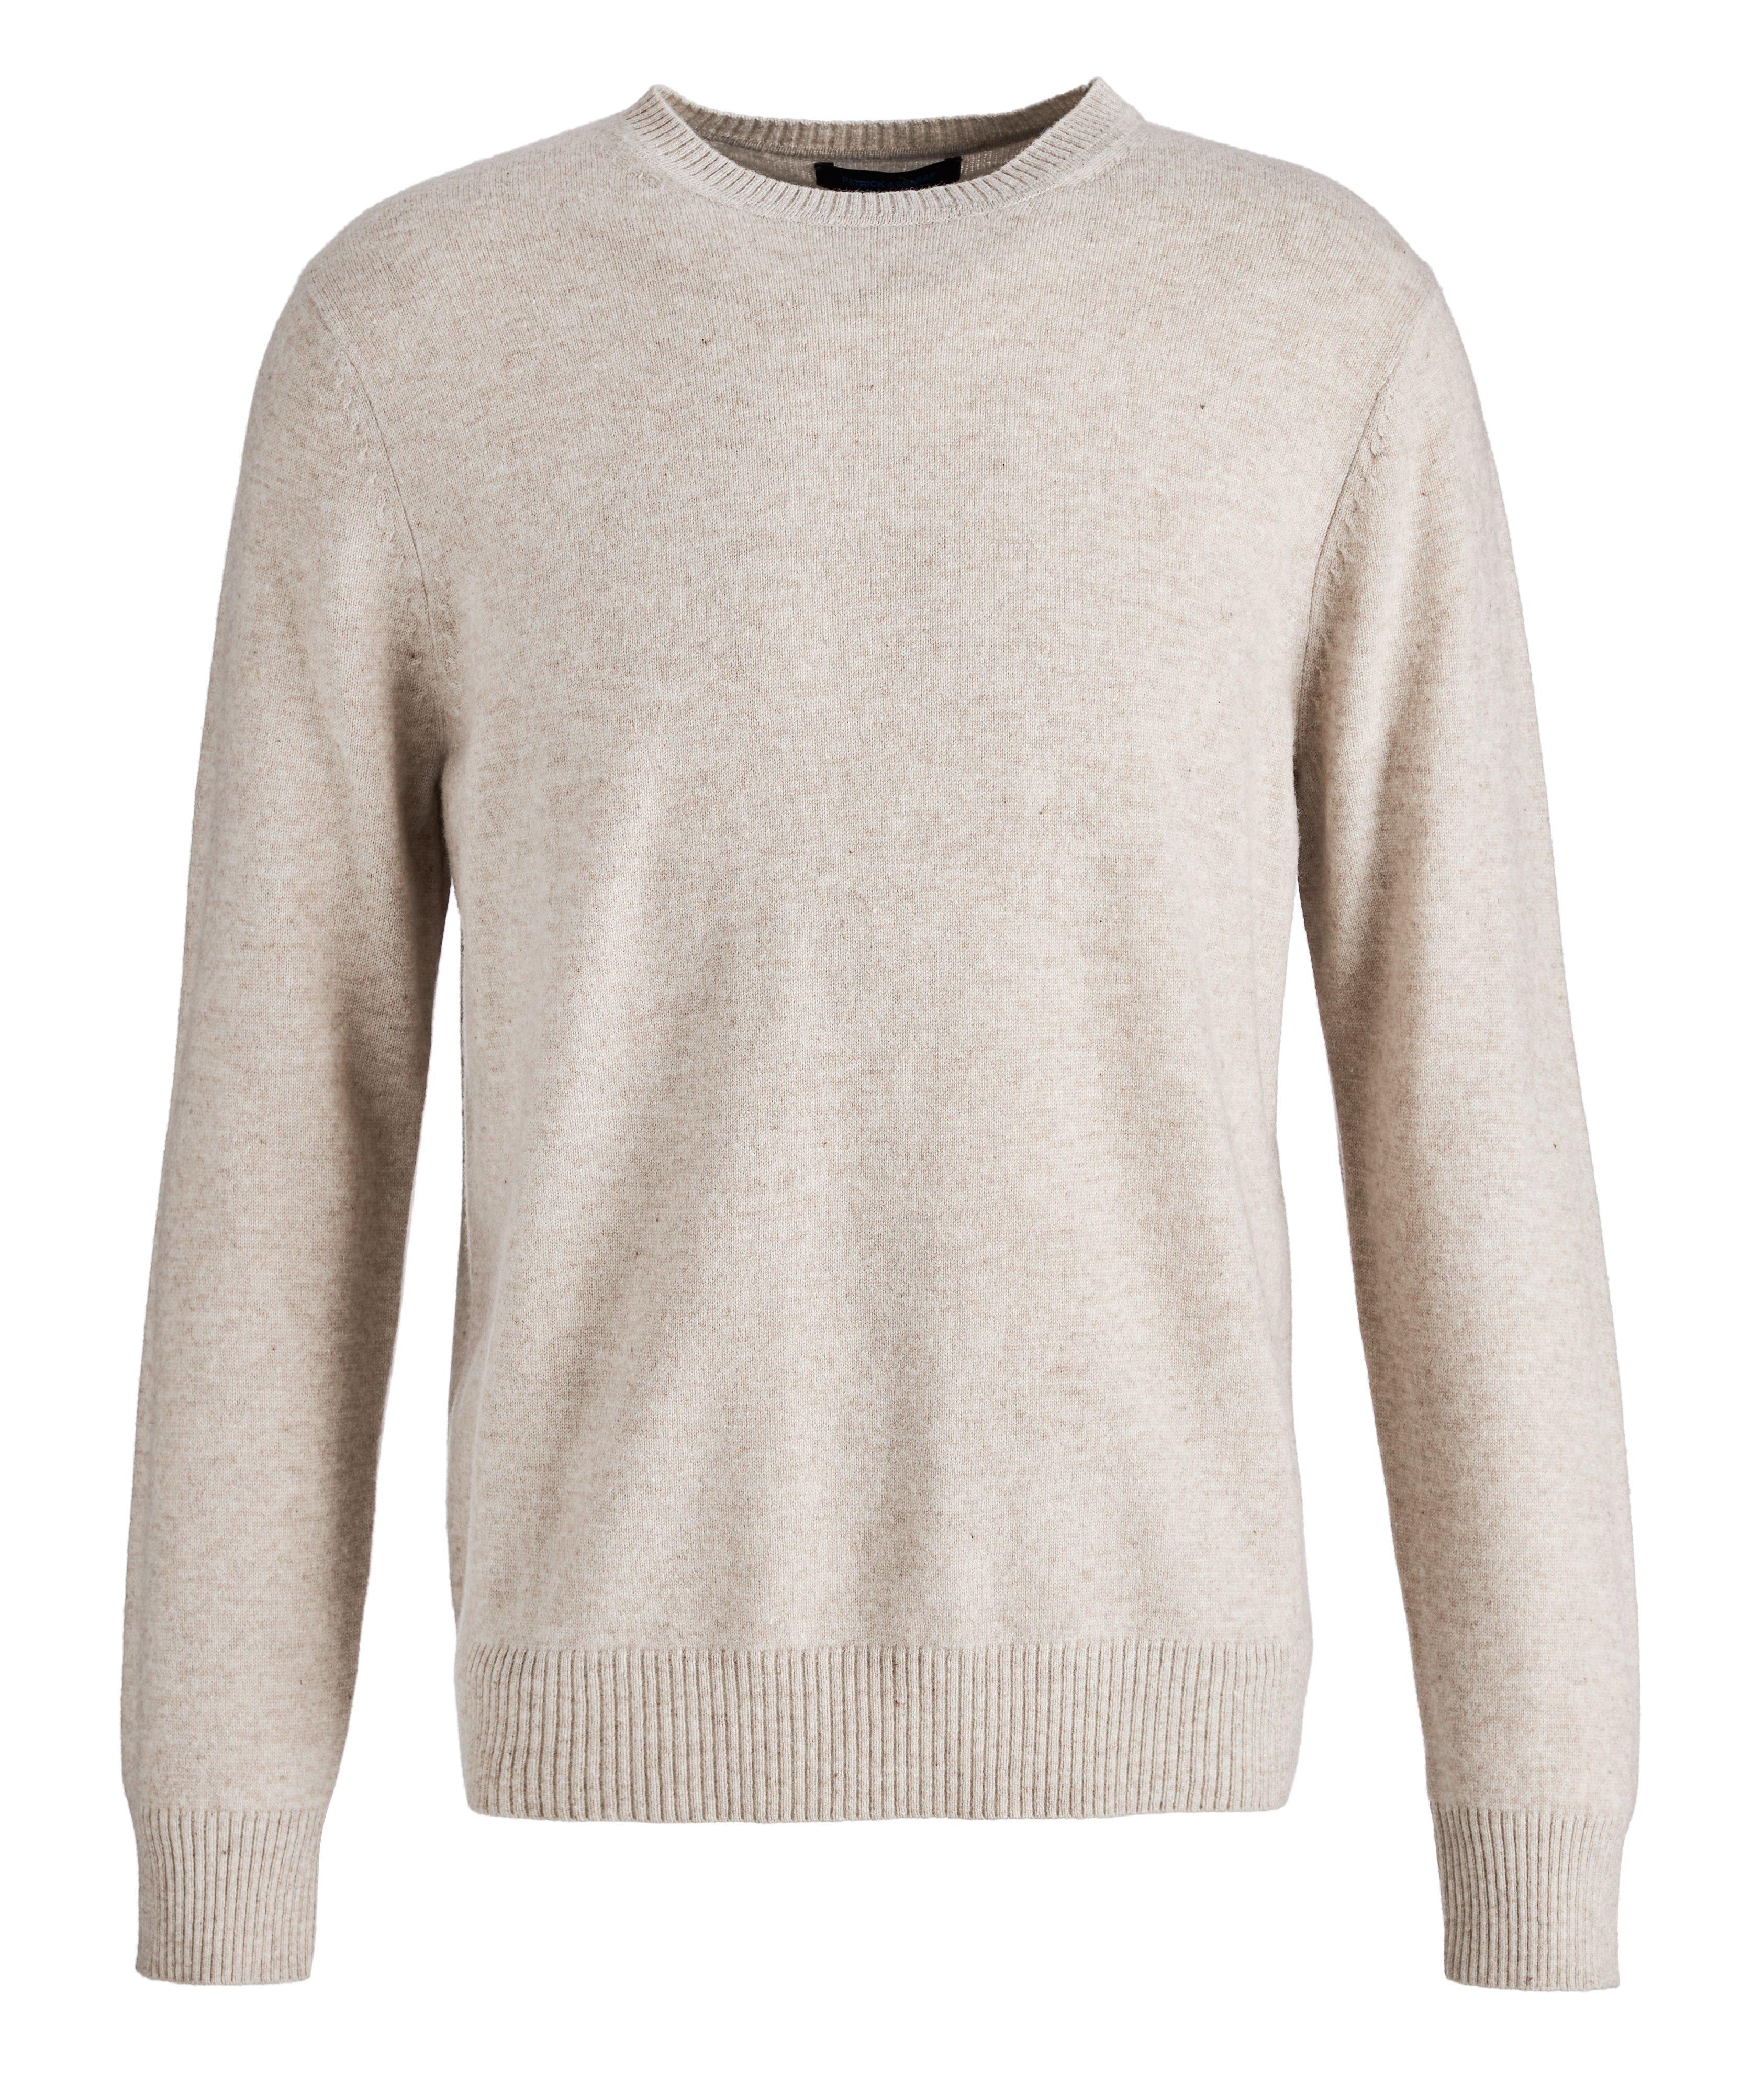 Wool-Cashmere Sweater image 0